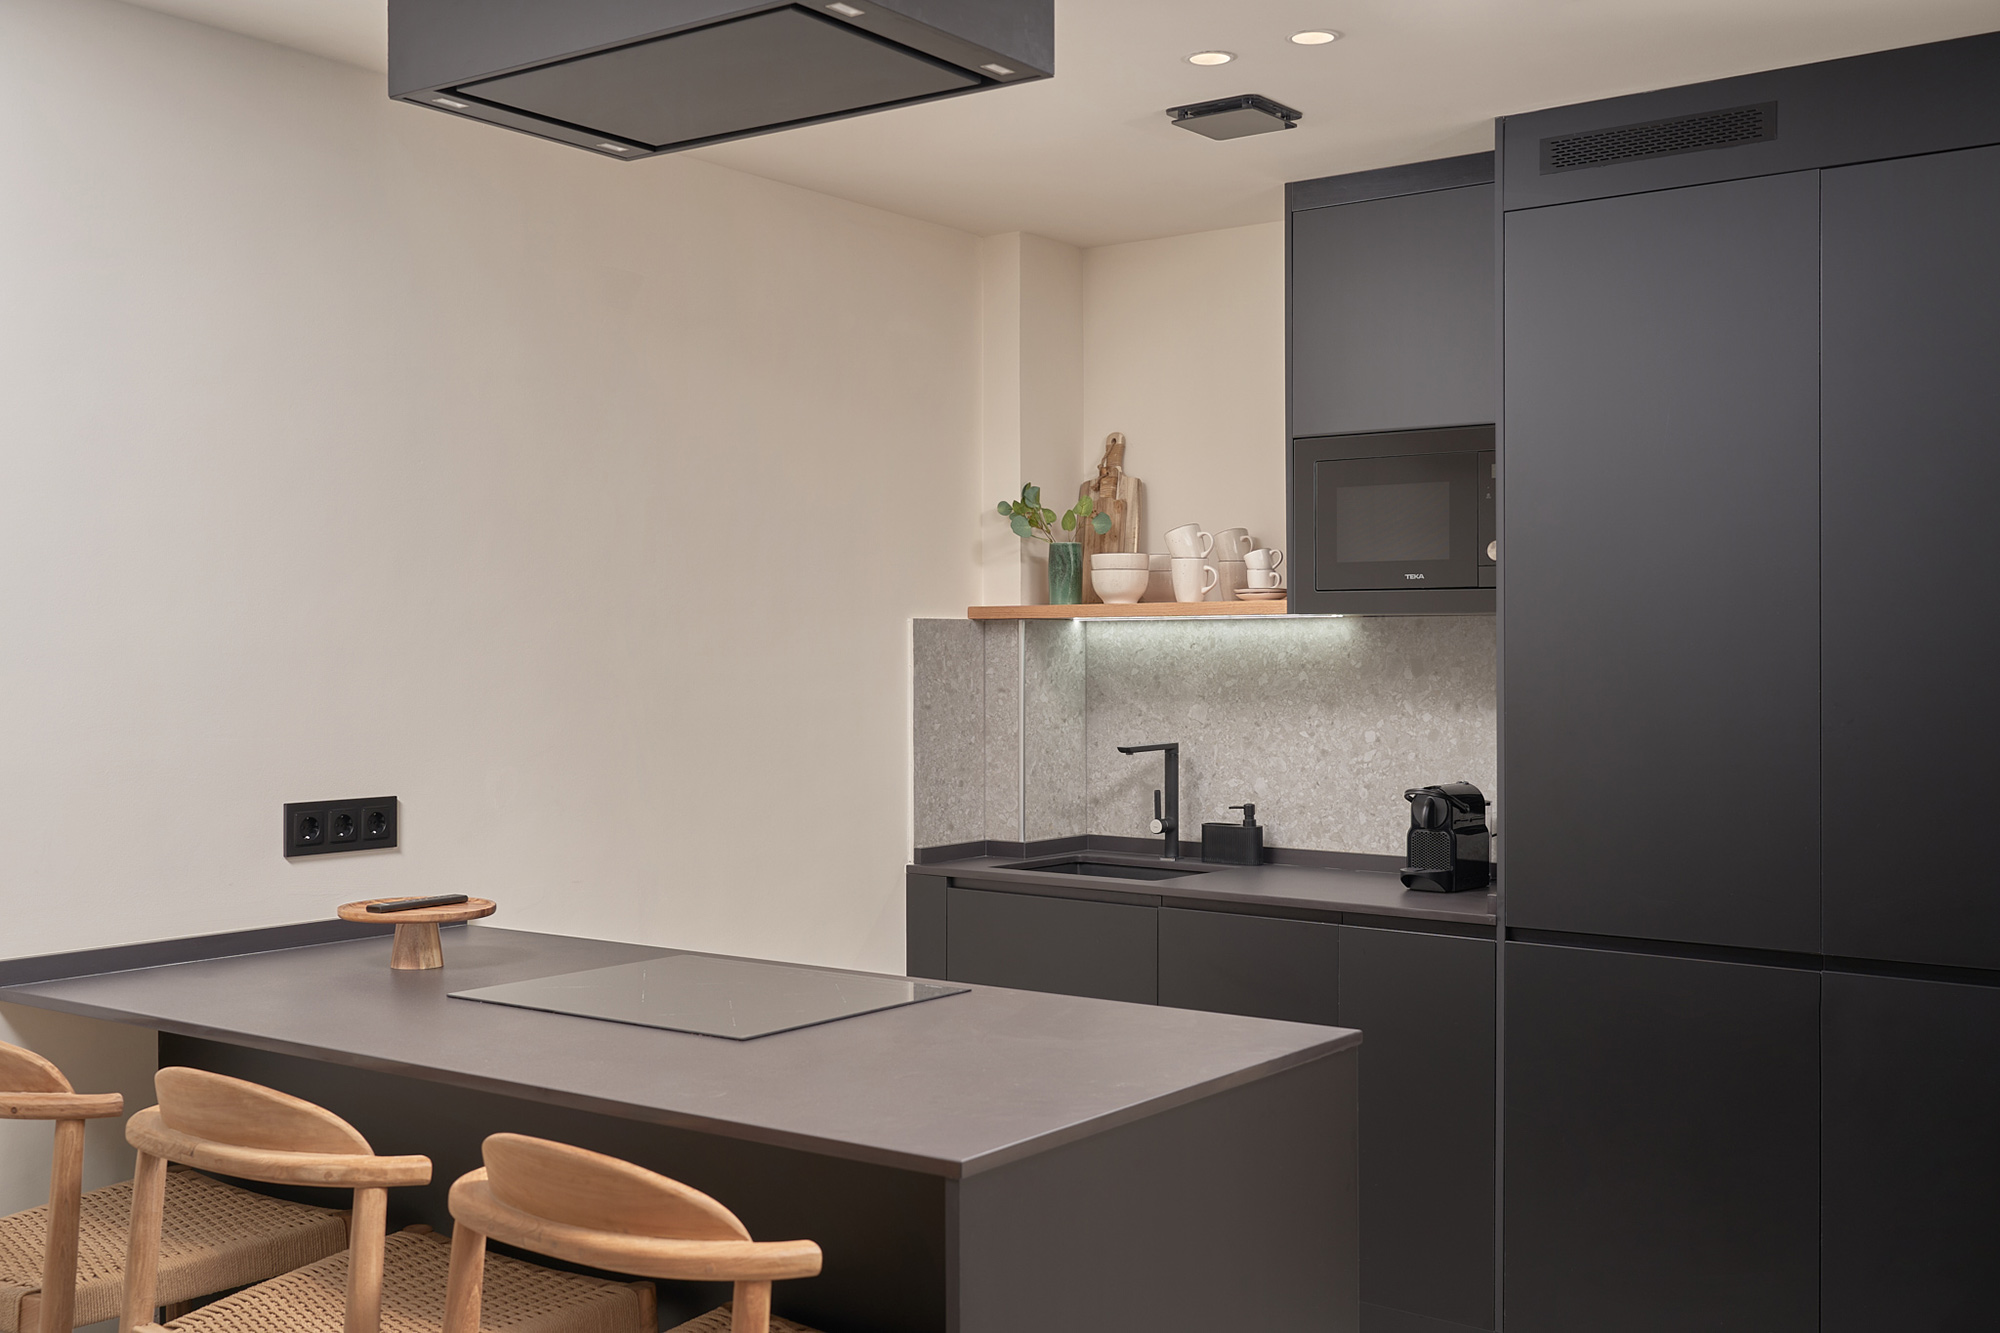 Image of Marina Guanarteme 15 in Dekton for the stunning kitchens of a residential tower in Dubai - Cosentino